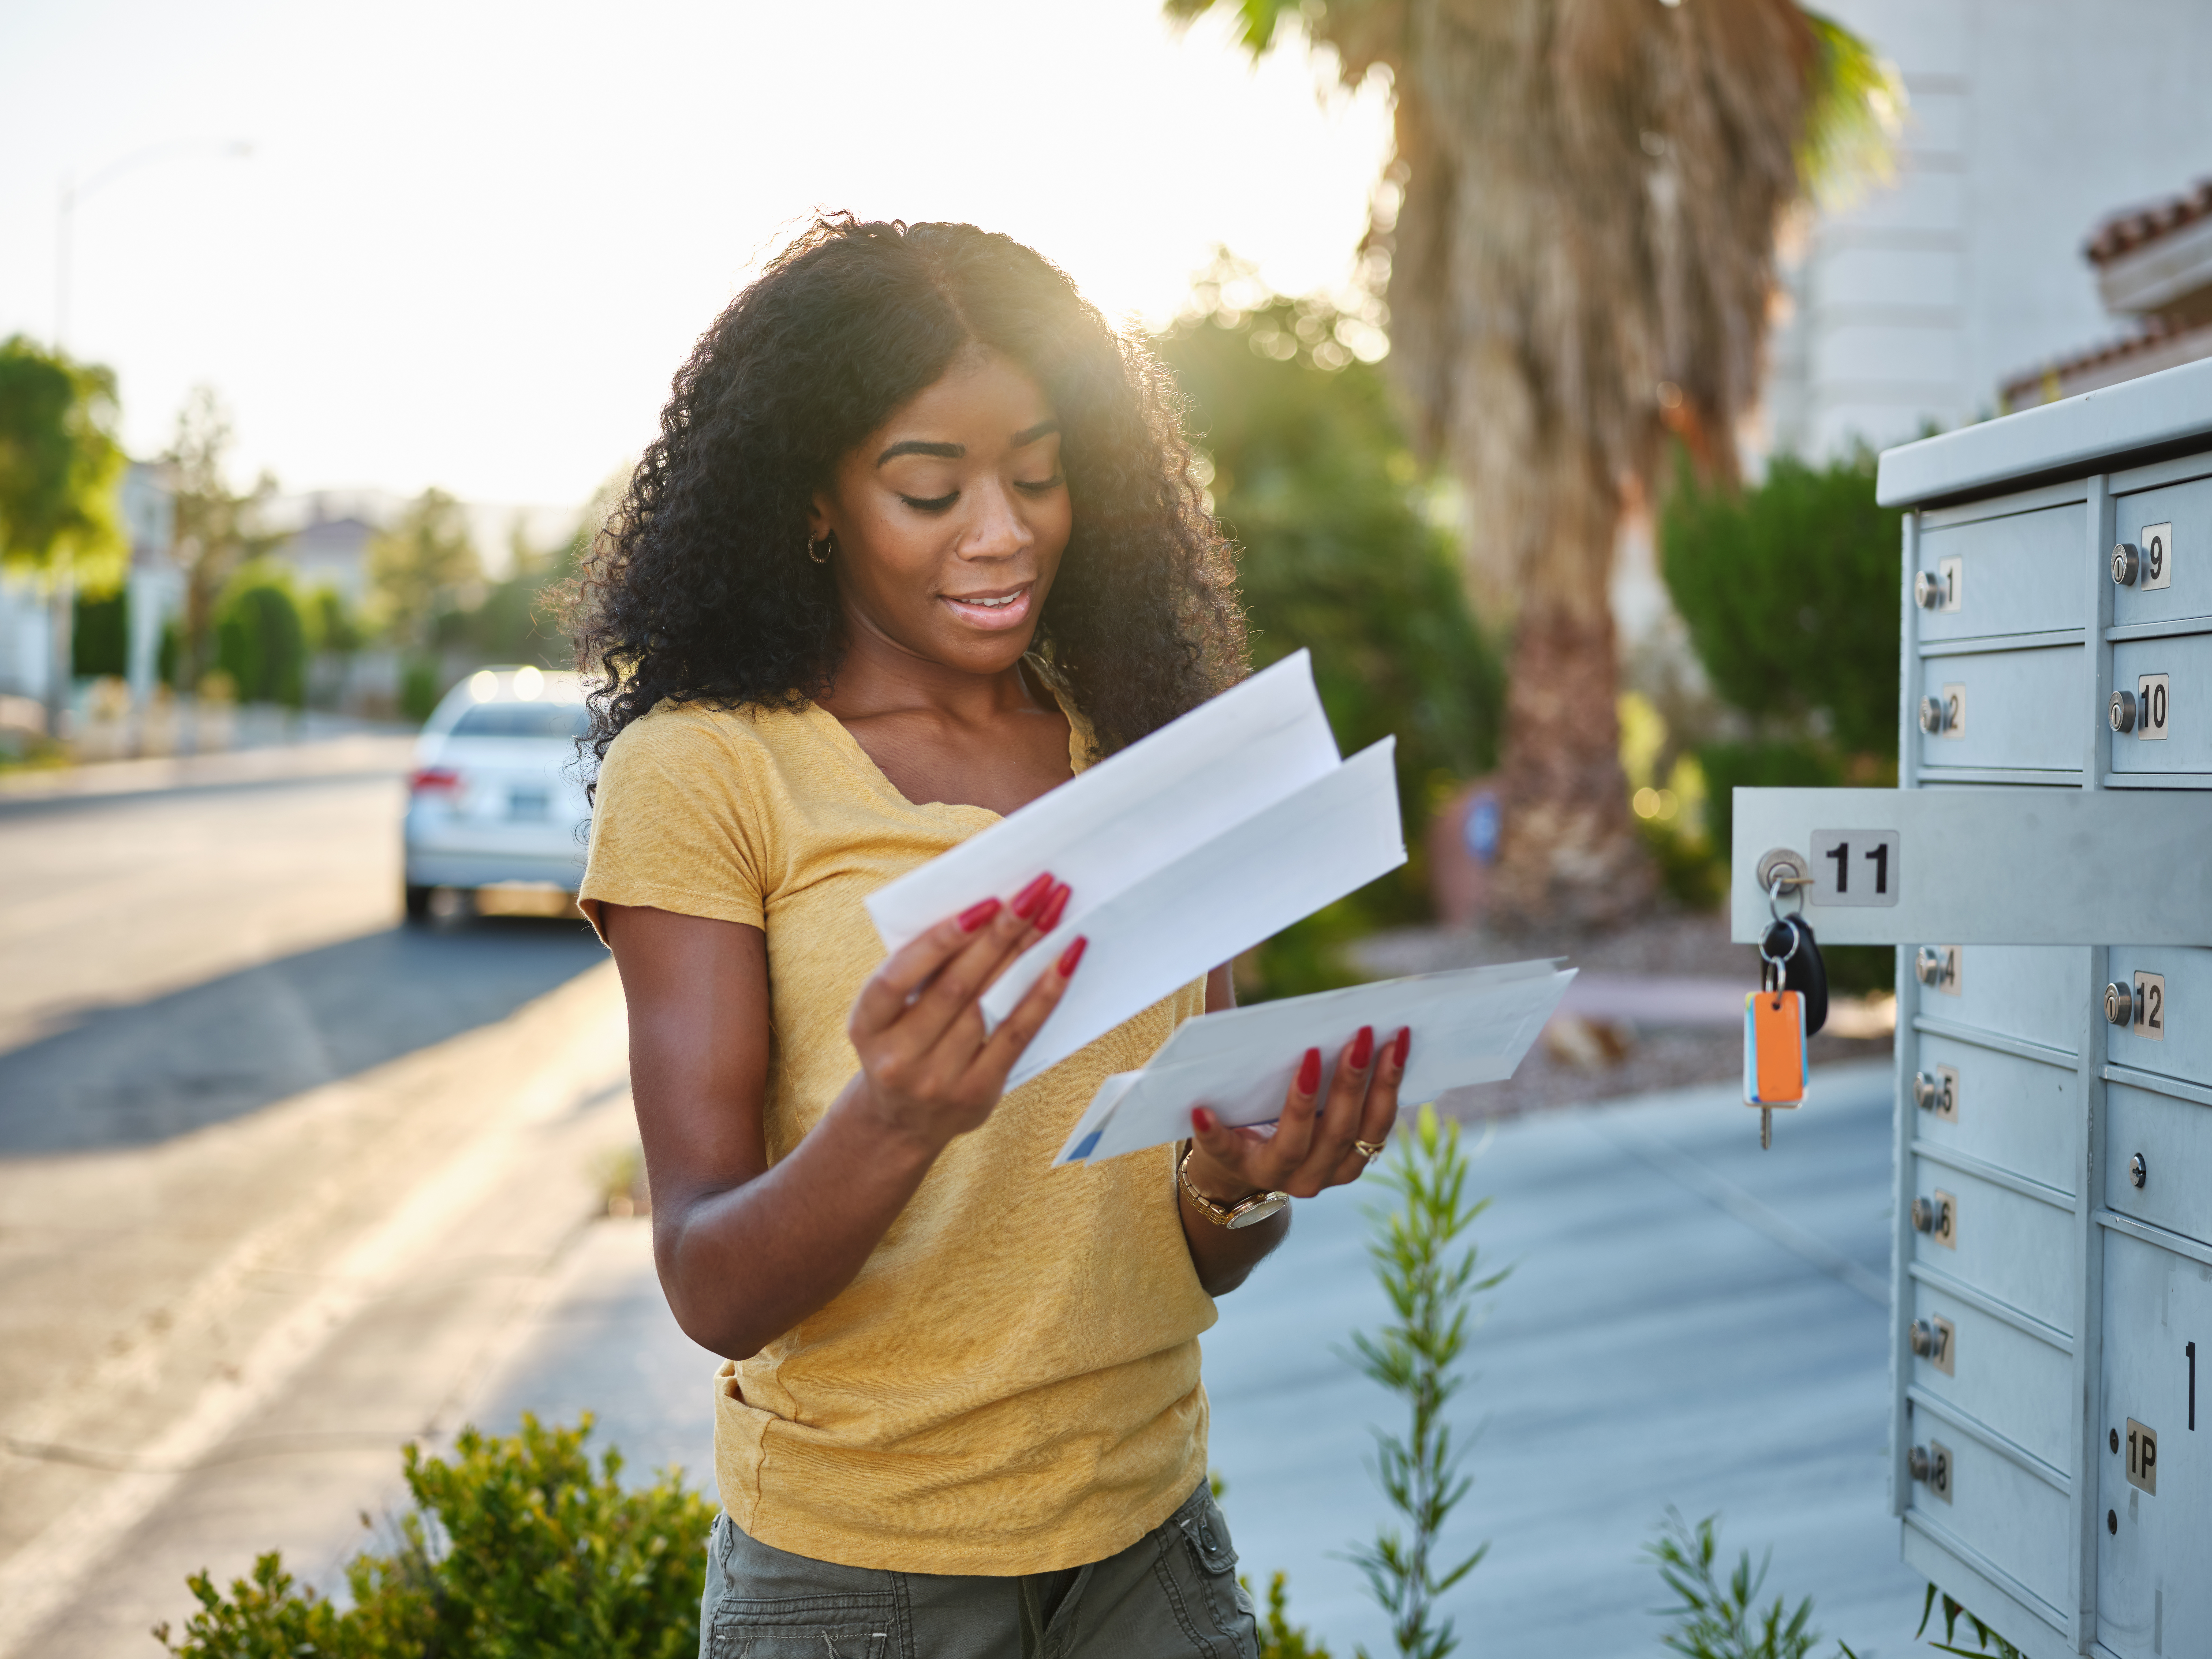 A woman checks her mailbox and goes through her mail